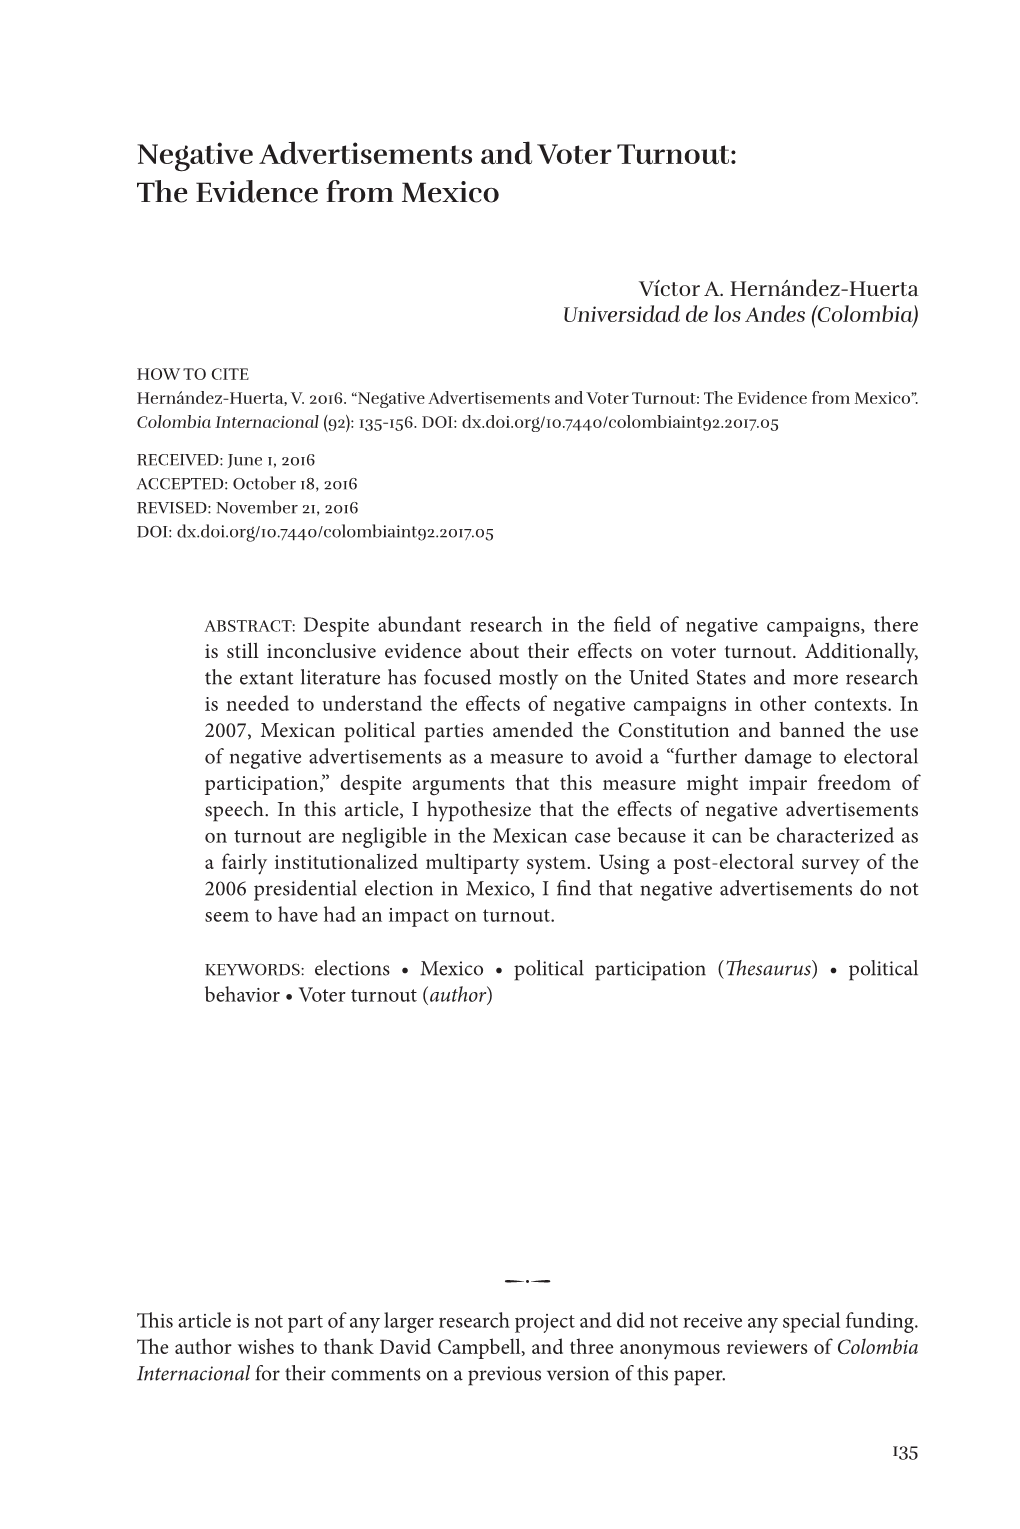 Negative Advertisements and Voter Turnout: the Evidence from Mexico